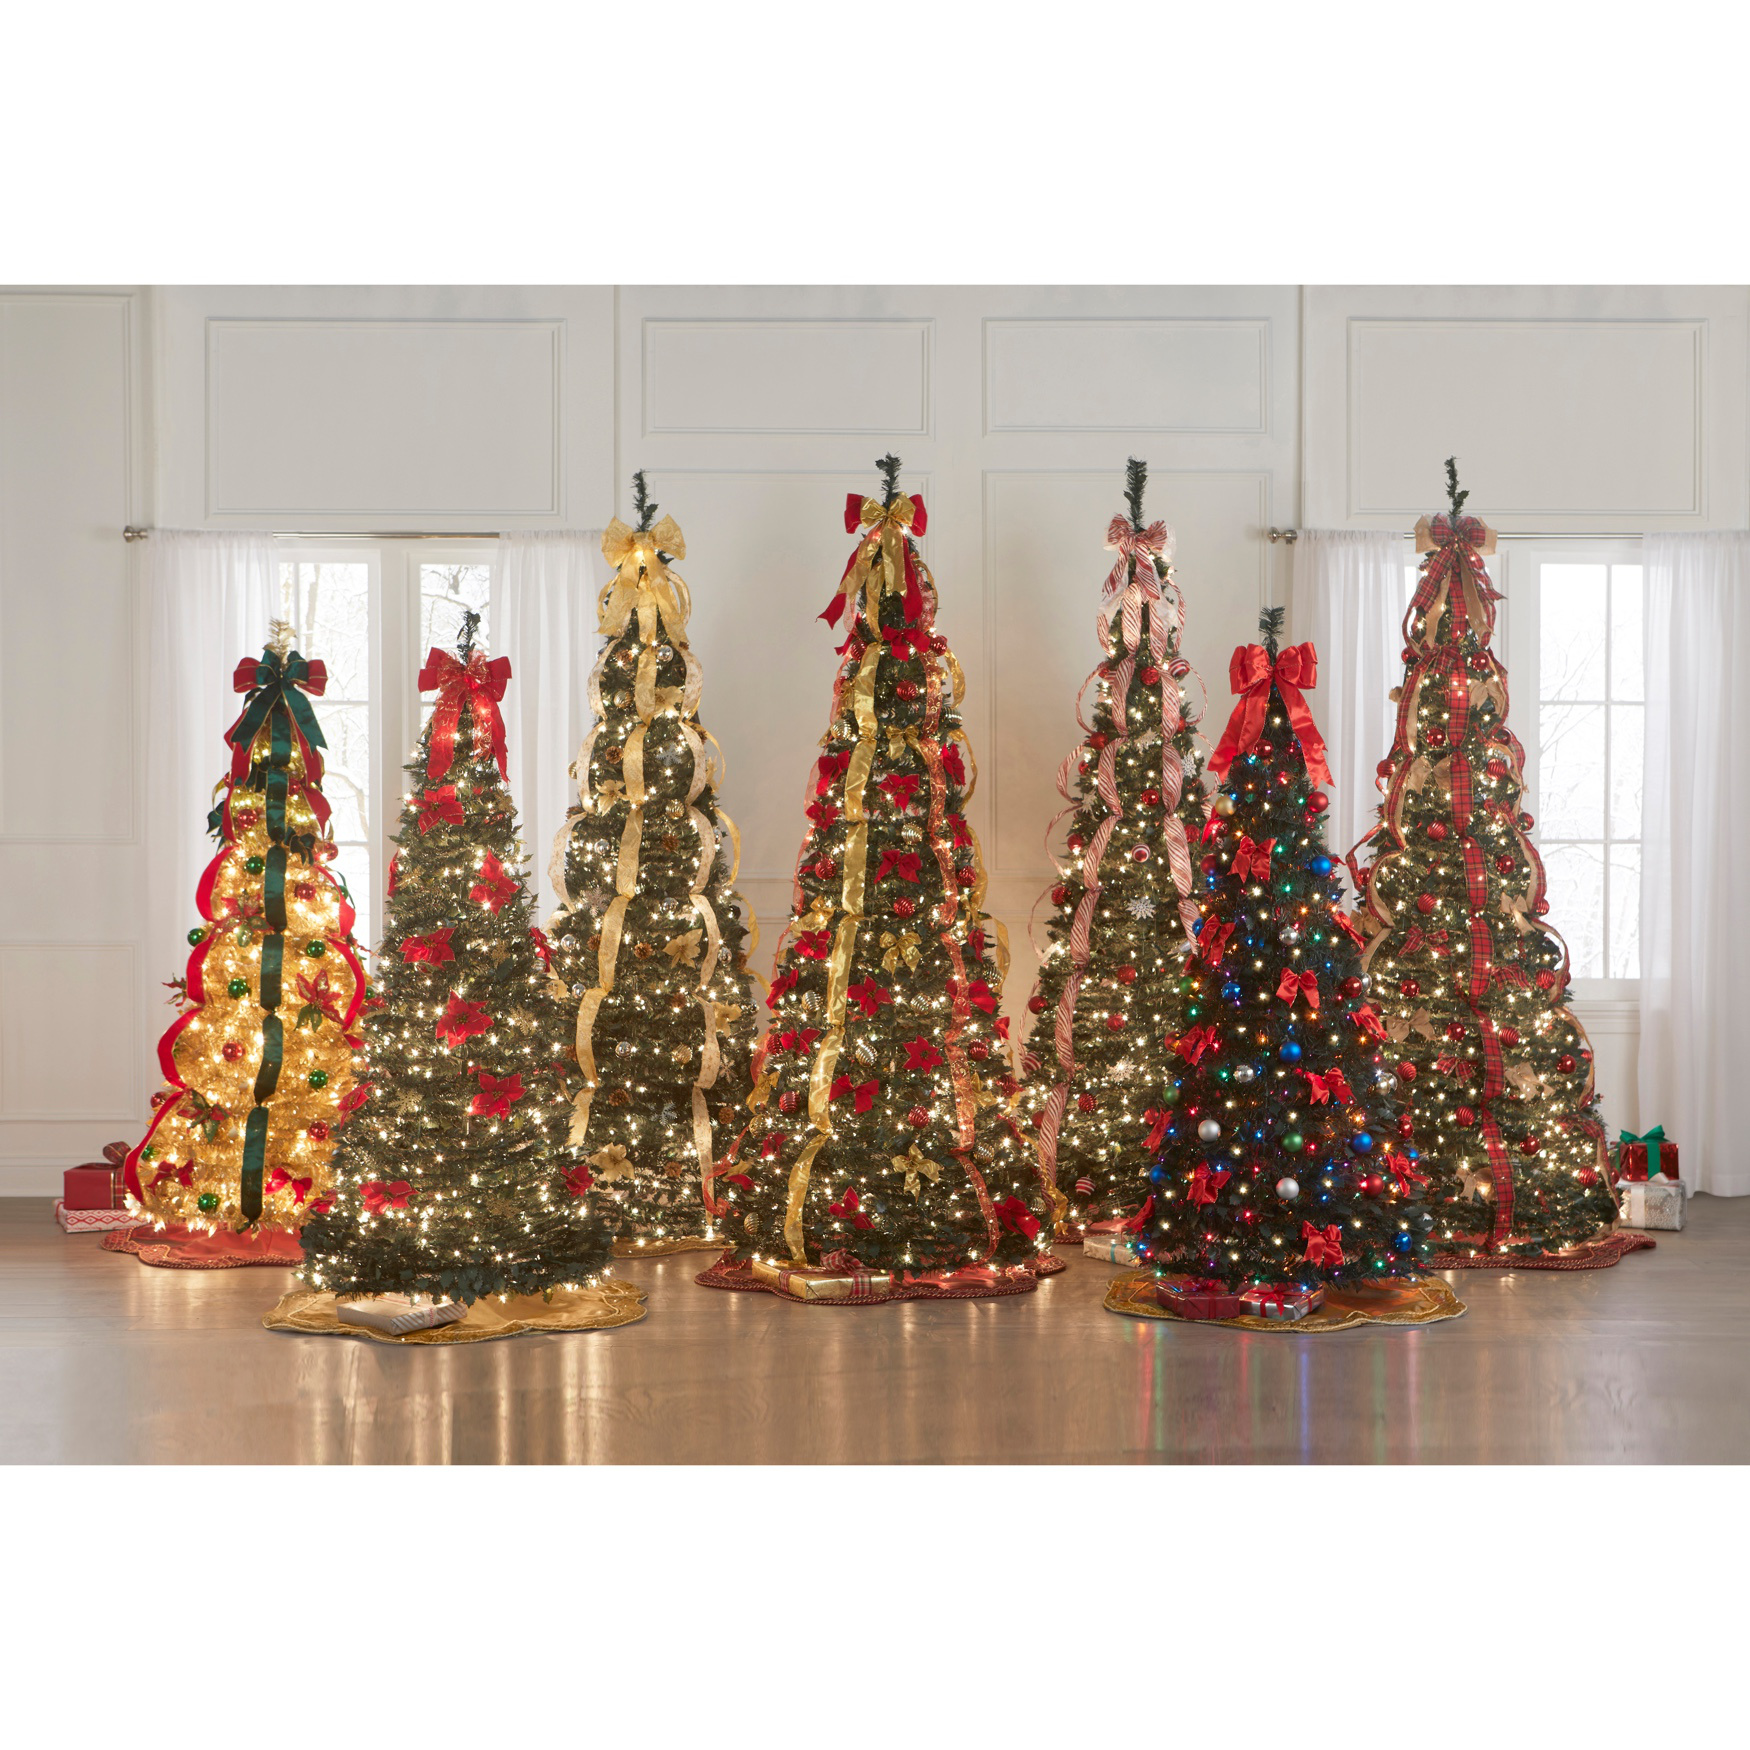 Minimalist Decorated Christmas Trees For Sale with Simple Decor